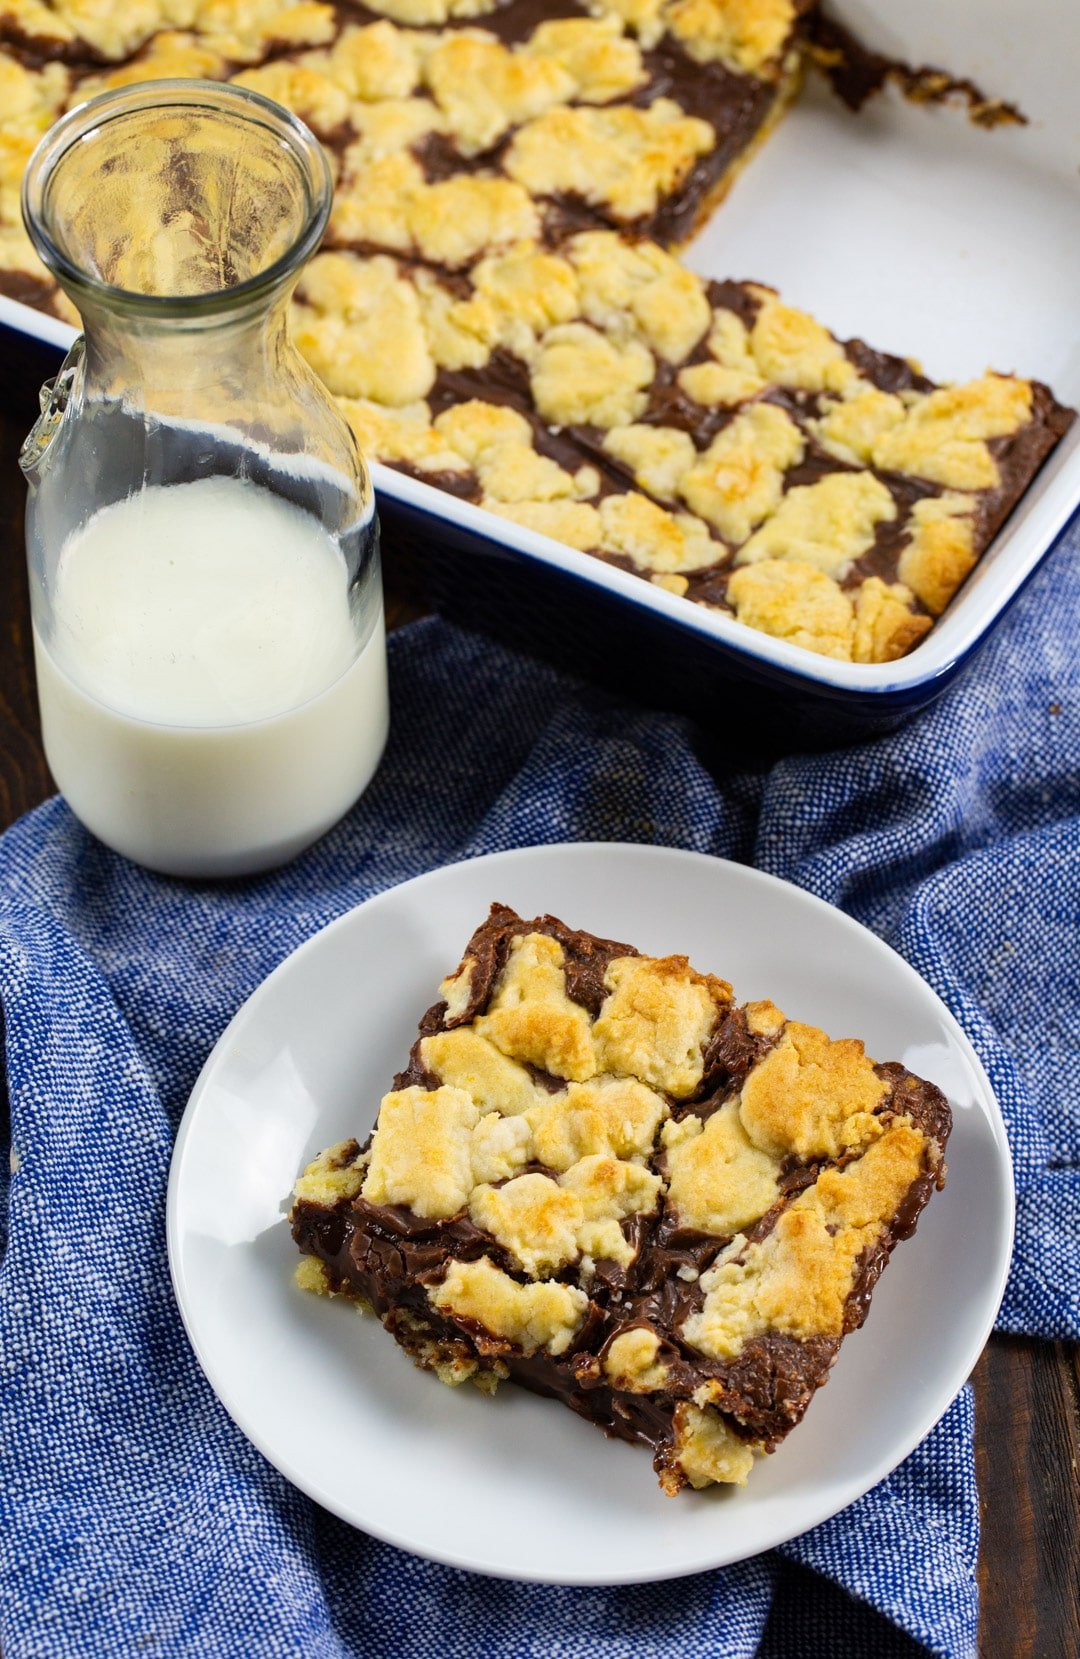 Cake Mix Bar on plate, glass of milk, and bars in baking dish.